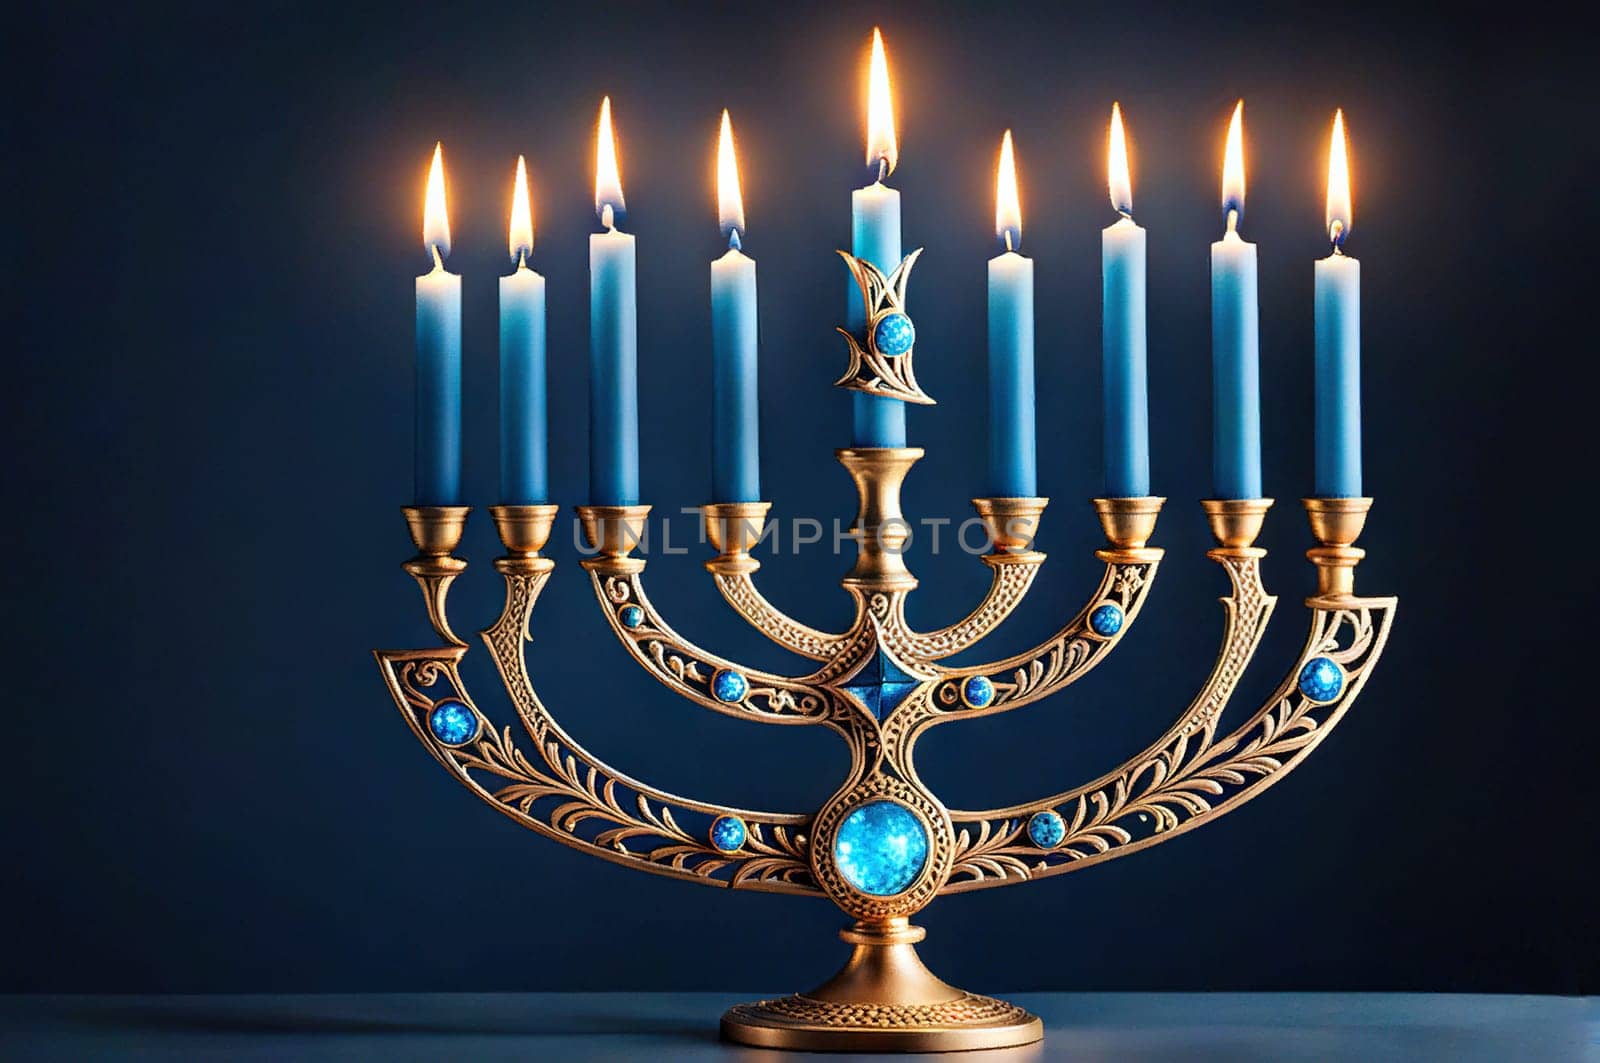 Bronze Hanukkah menorah with burning candles on table. Holiday greeting card concept.